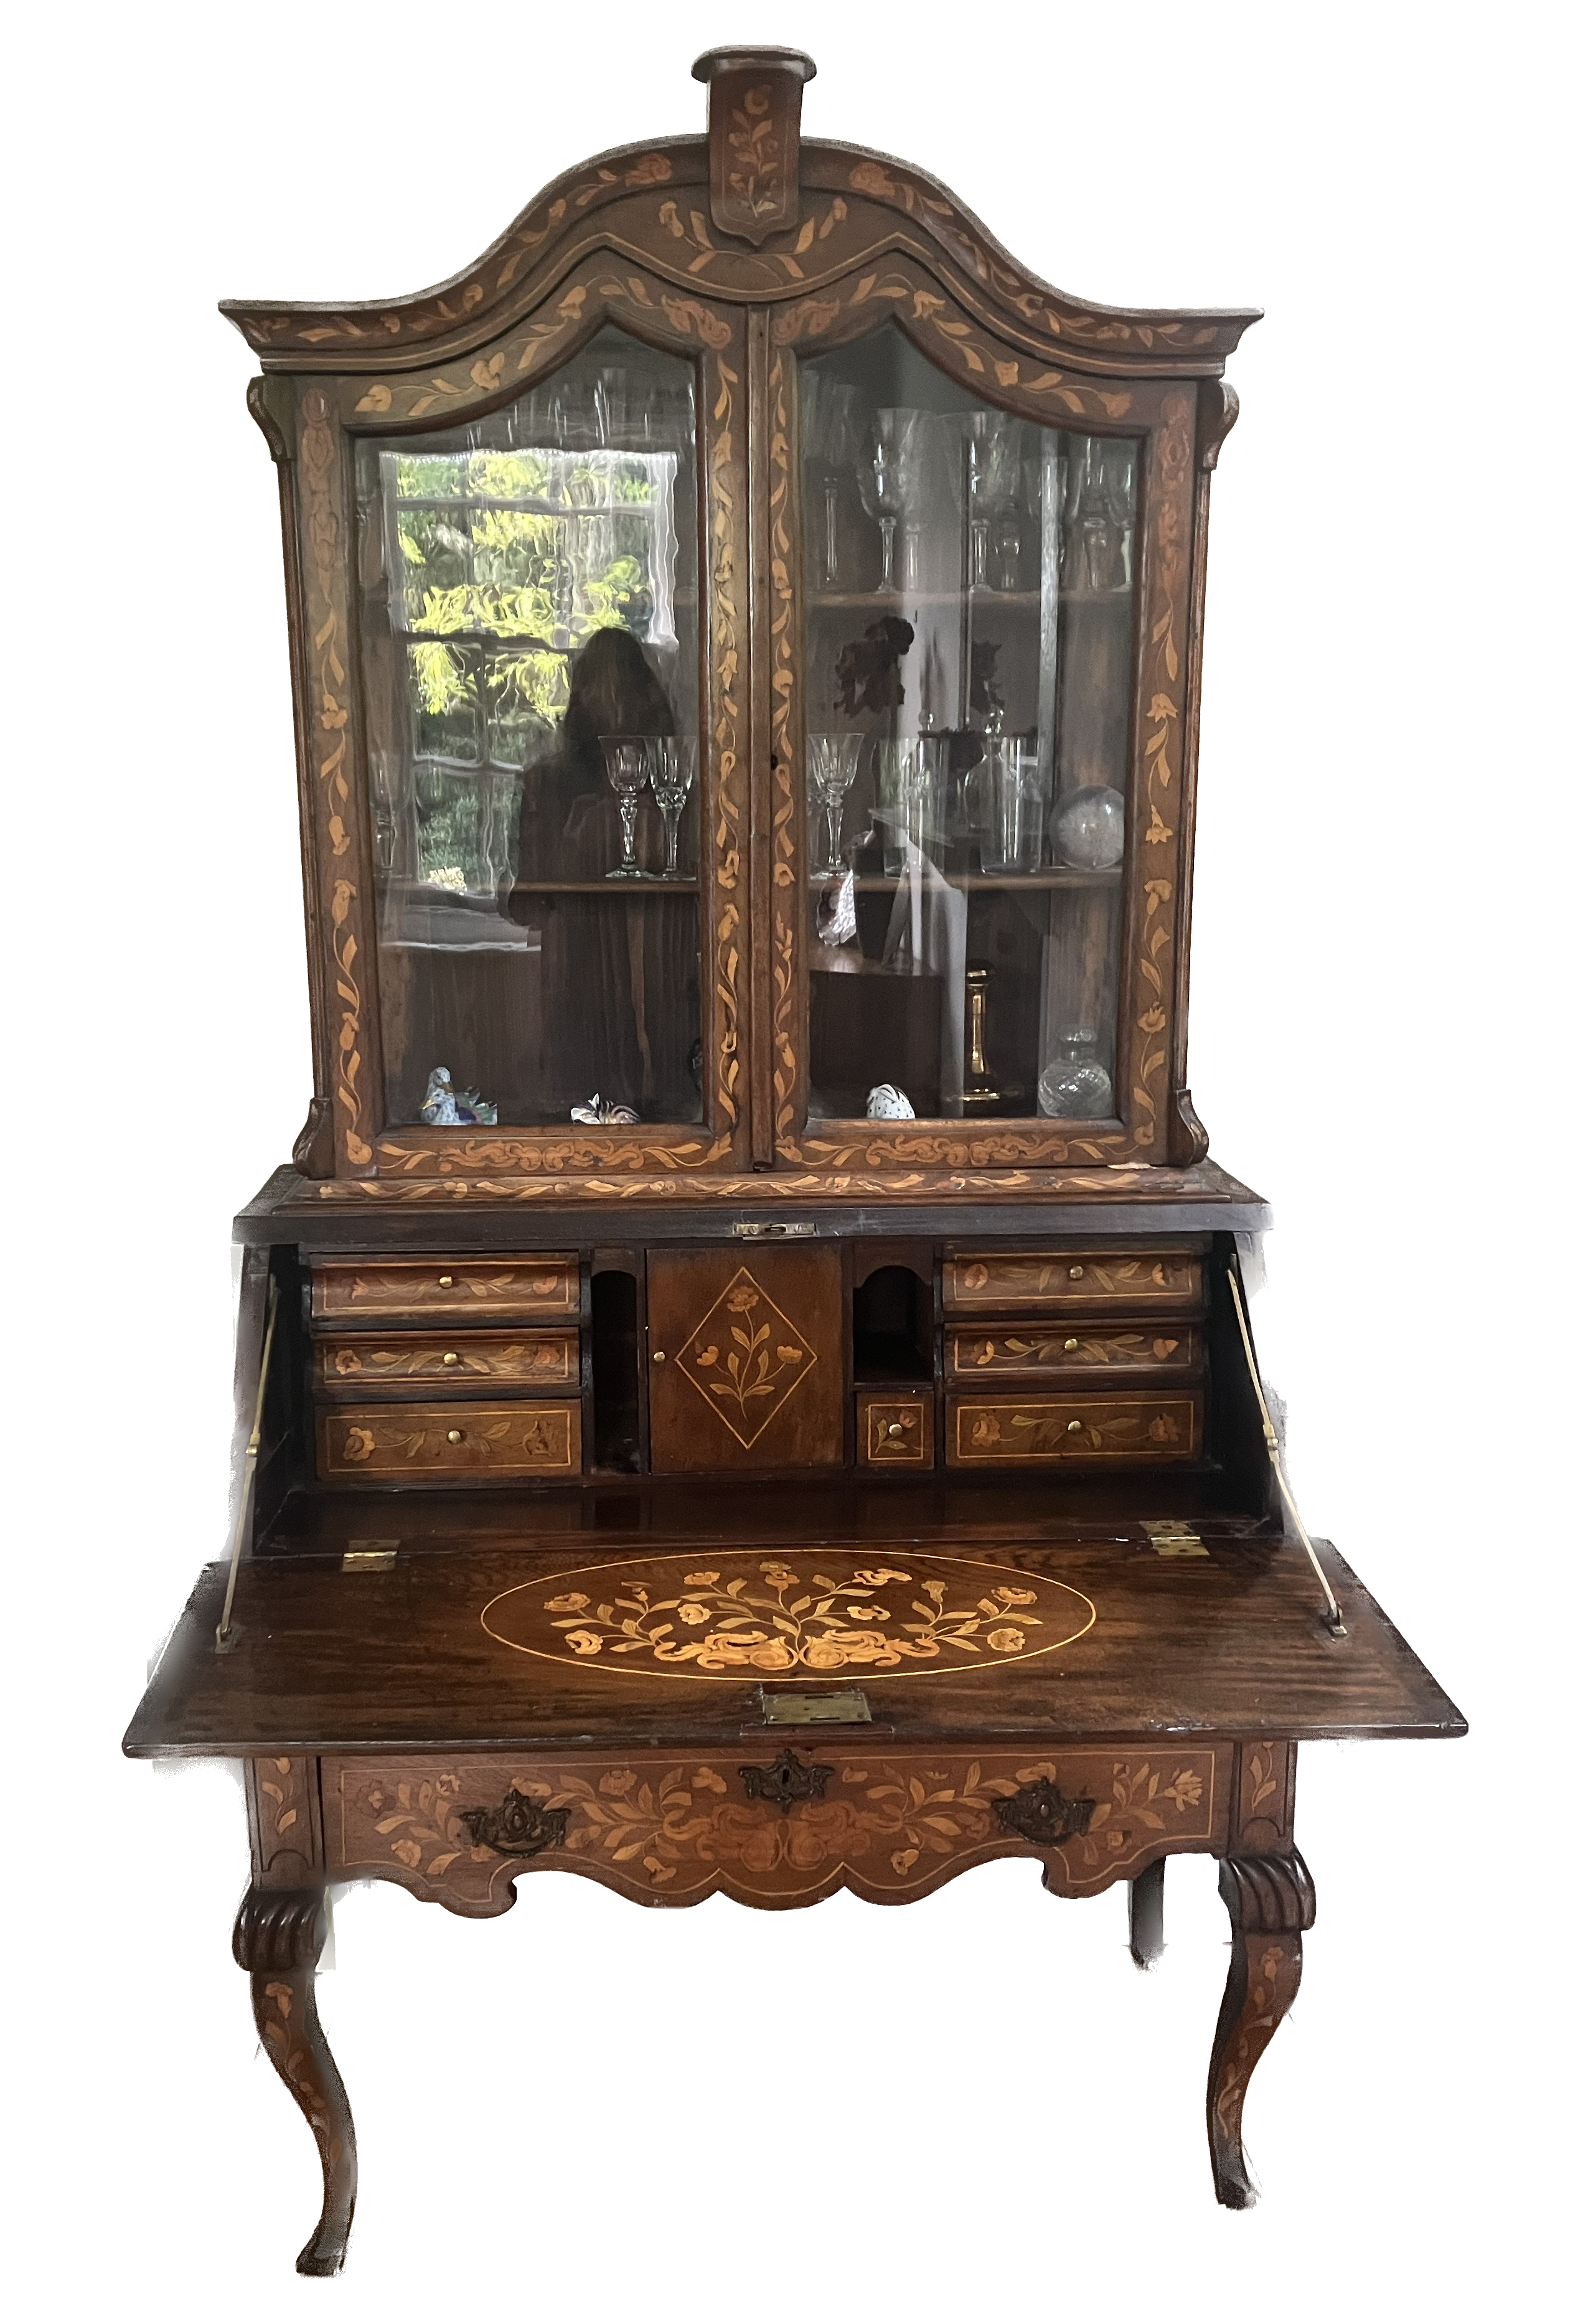 An early 19th century and later Dutch oak and walnut floral marquetry inlaid bureau bookcase, width 98cm, depth 48cm, height 192cm